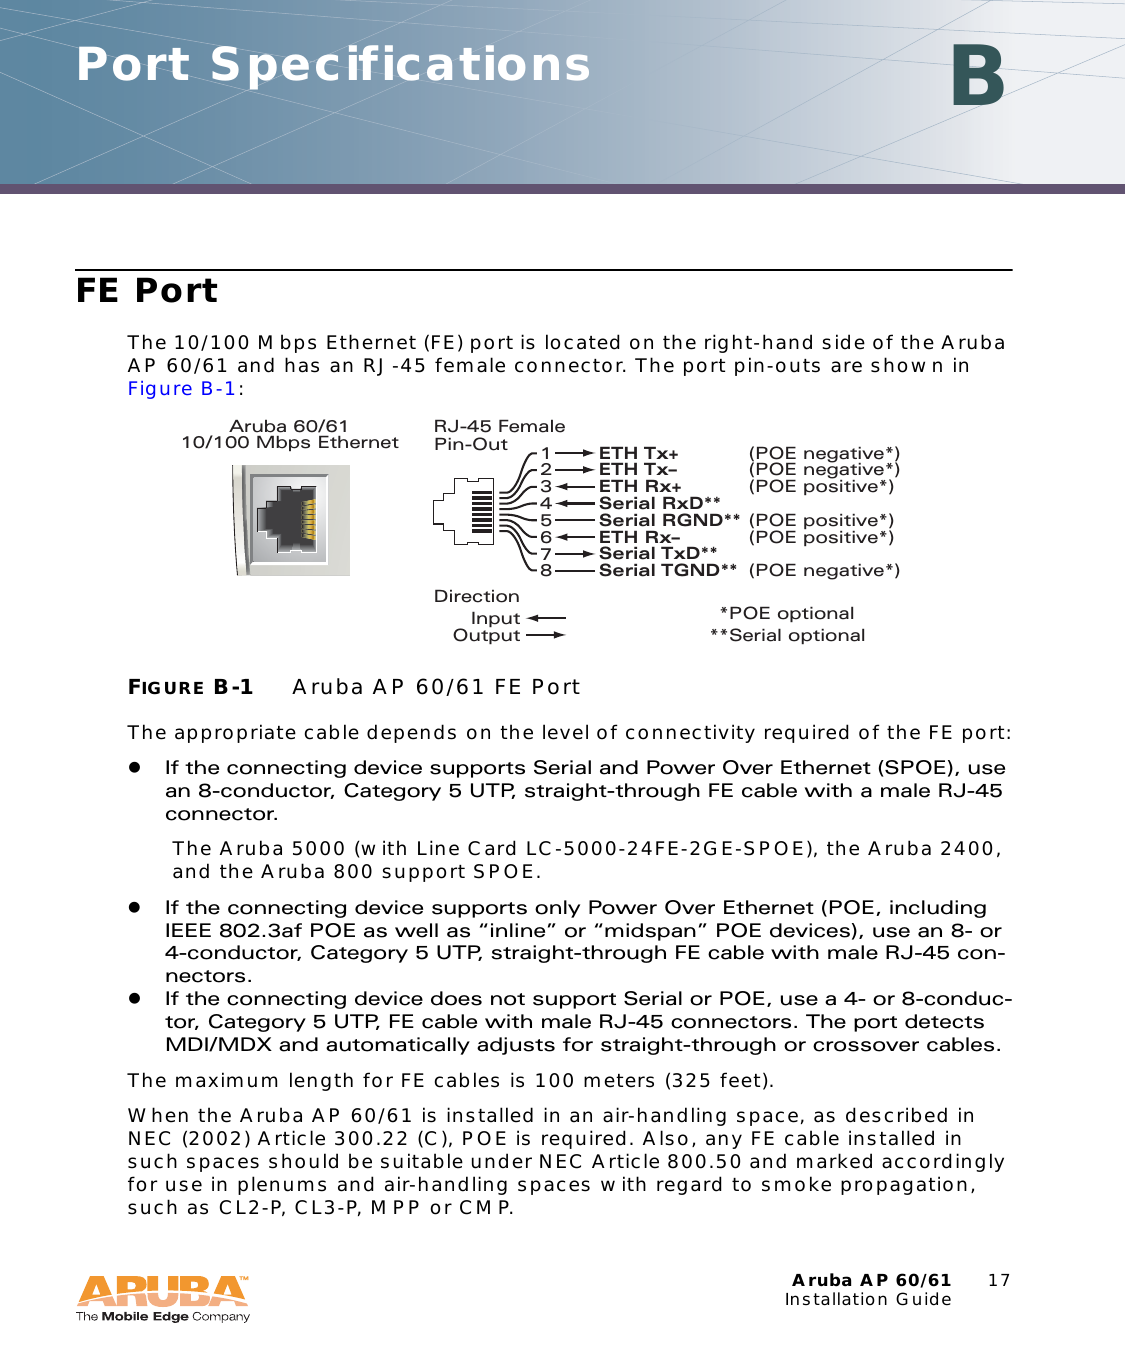 Aruba AP 60/61 17Installation GuidePort Specifications BFE PortThe 10/100 Mbps Ethernet (FE) port is located on the right-hand side of the Aruba AP 60/61 and has an RJ-45 female connector. The port pin-outs are shown in Figure B-1:FIGURE B-1 Aruba AP 60/61 FE PortThe appropriate cable depends on the level of connectivity required of the FE port:zIf the connecting device supports Serial and Power Over Ethernet (SPOE), use an 8-conductor, Category 5 UTP, straight-through FE cable with a male RJ-45 connector.The Aruba 5000 (with Line Card LC-5000-24FE-2GE-SPOE), the Aruba 2400, and the Aruba 800 support SPOE.zIf the connecting device supports only Power Over Ethernet (POE, including IEEE 802.3af POE as well as “inline” or “midspan” POE devices), use an 8- or 4-conductor, Category 5 UTP, straight-through FE cable with male RJ-45 con-nectors.zIf the connecting device does not support Serial or POE, use a 4- or 8-conduc-tor, Category 5 UTP, FE cable with male RJ-45 connectors. The port detects MDI/MDX and automatically adjusts for straight-through or crossover cables.The maximum length for FE cables is 100 meters (325 feet).When the Aruba AP 60/61 is installed in an air-handling space, as described in NEC (2002) Article 300.22 (C), POE is required. Also, any FE cable installed in such spaces should be suitable under NEC Article 800.50 and marked accordingly for use in plenums and air-handling spaces with regard to smoke propagation, such as CL2-P, CL3-P, MPP or CMP.Aruba 60/6110/100 Mbps EthernetRJ-45 FemalePin-Out*POE optional**Serial optionalSerial RxD**  Serial RGND** (POE positive*) Serial TxD**   Serial TGND**  (POE negative*)12345678ETH Tx+  (POE negative*)ETH Tx–  (POE negative*)ETH Rx+  (POE positive*)ETH Rx–    (POE positive*)    DirectionInputOutput 